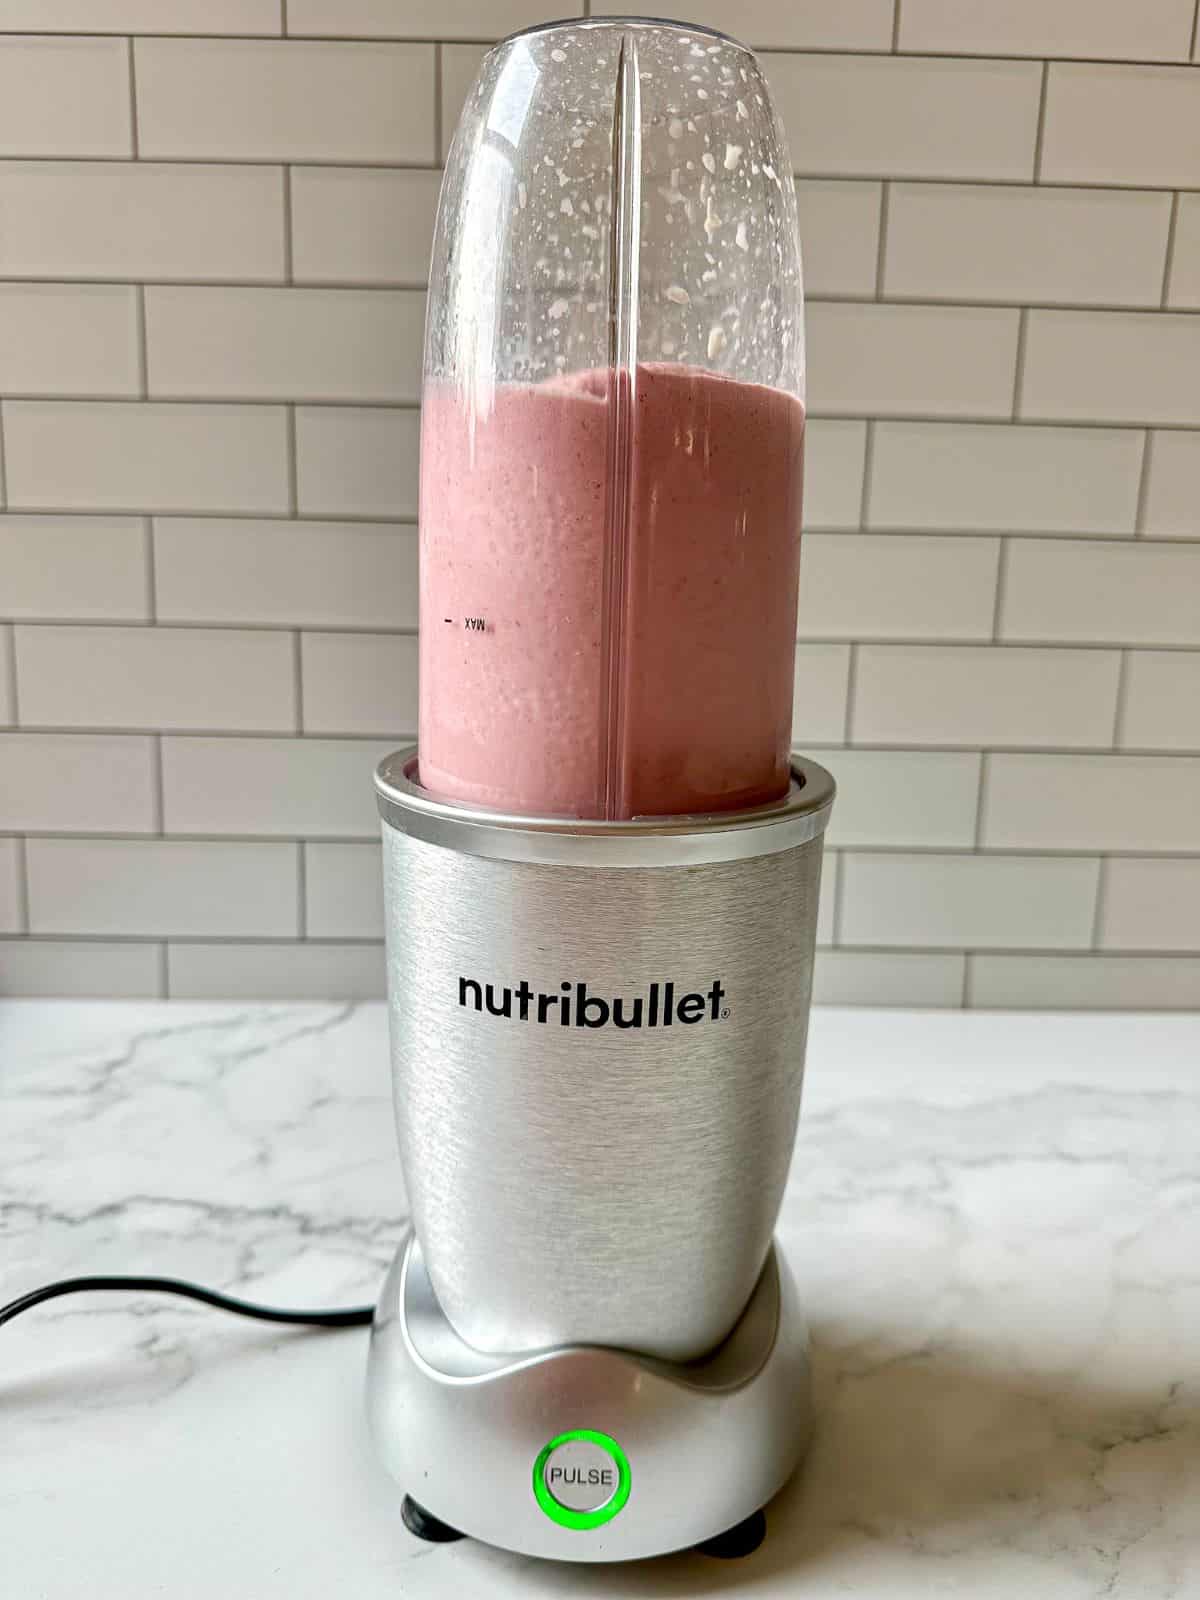 A creamy pink smoothie getting blended in a blender.